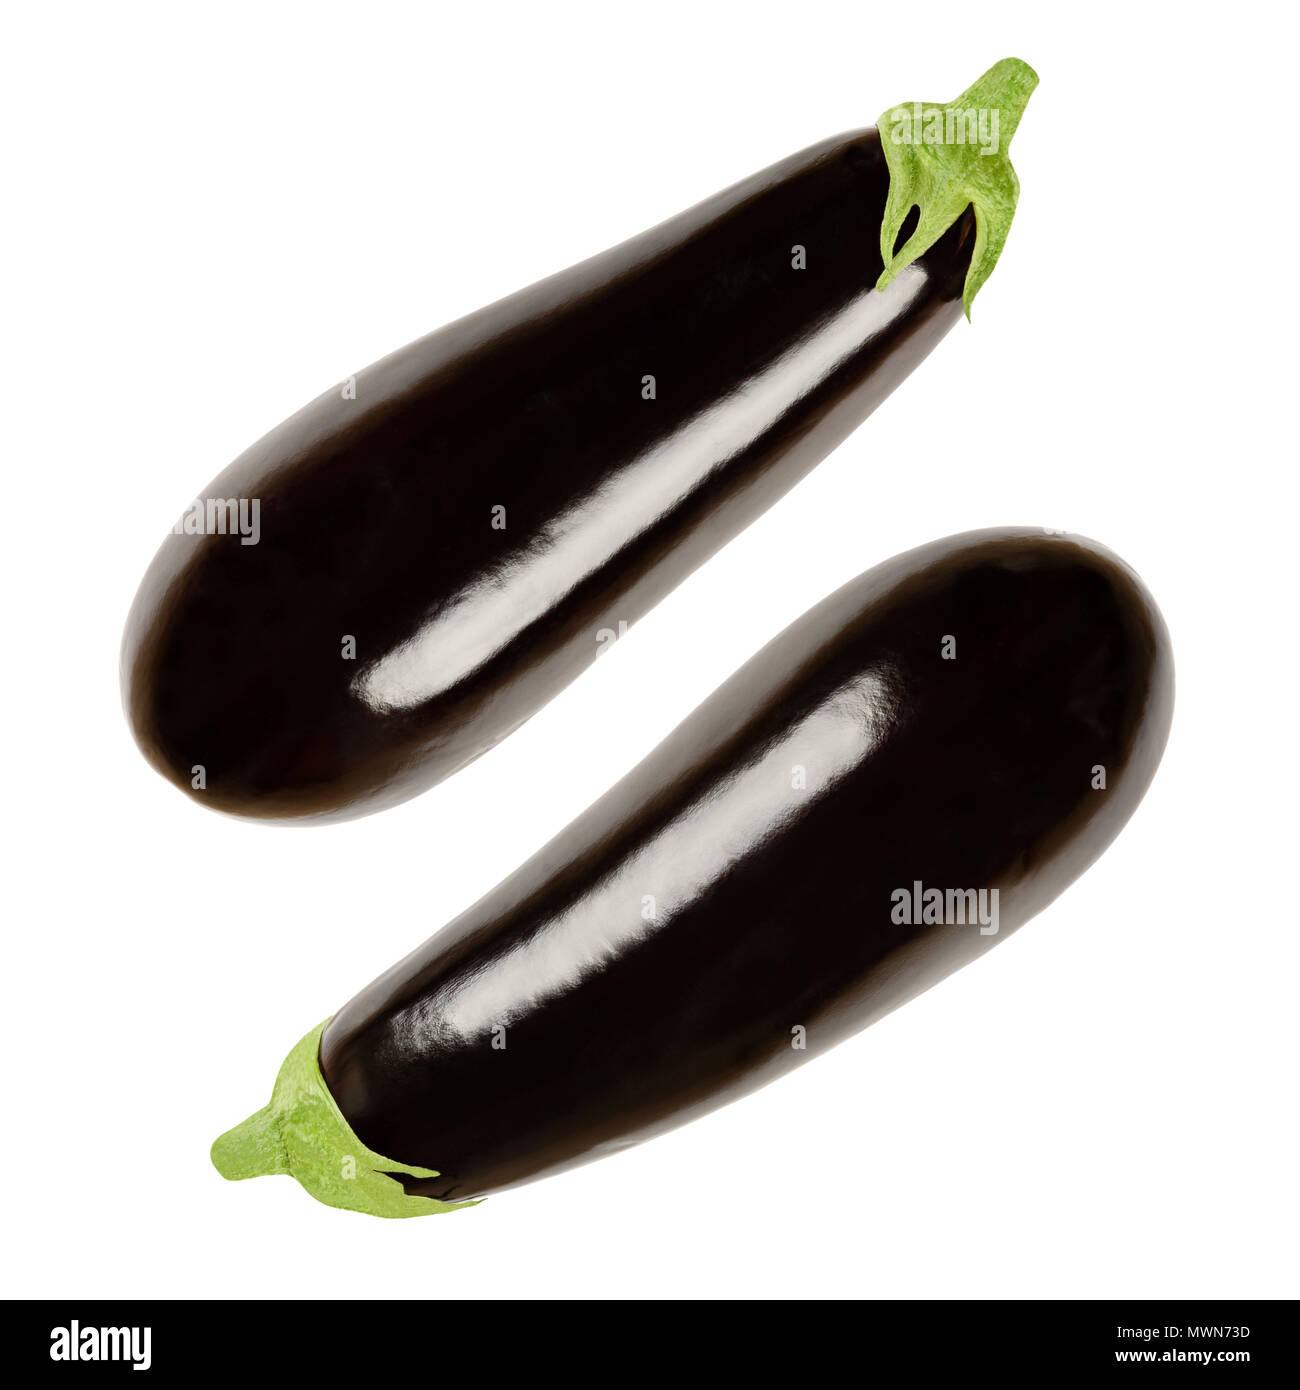 Two eggplants from above. Solanum melongena, also aubergine or brinjal. Nightshade. Elongated oval shaped black skinned fruit, used for cooking.Photo Stock Photo